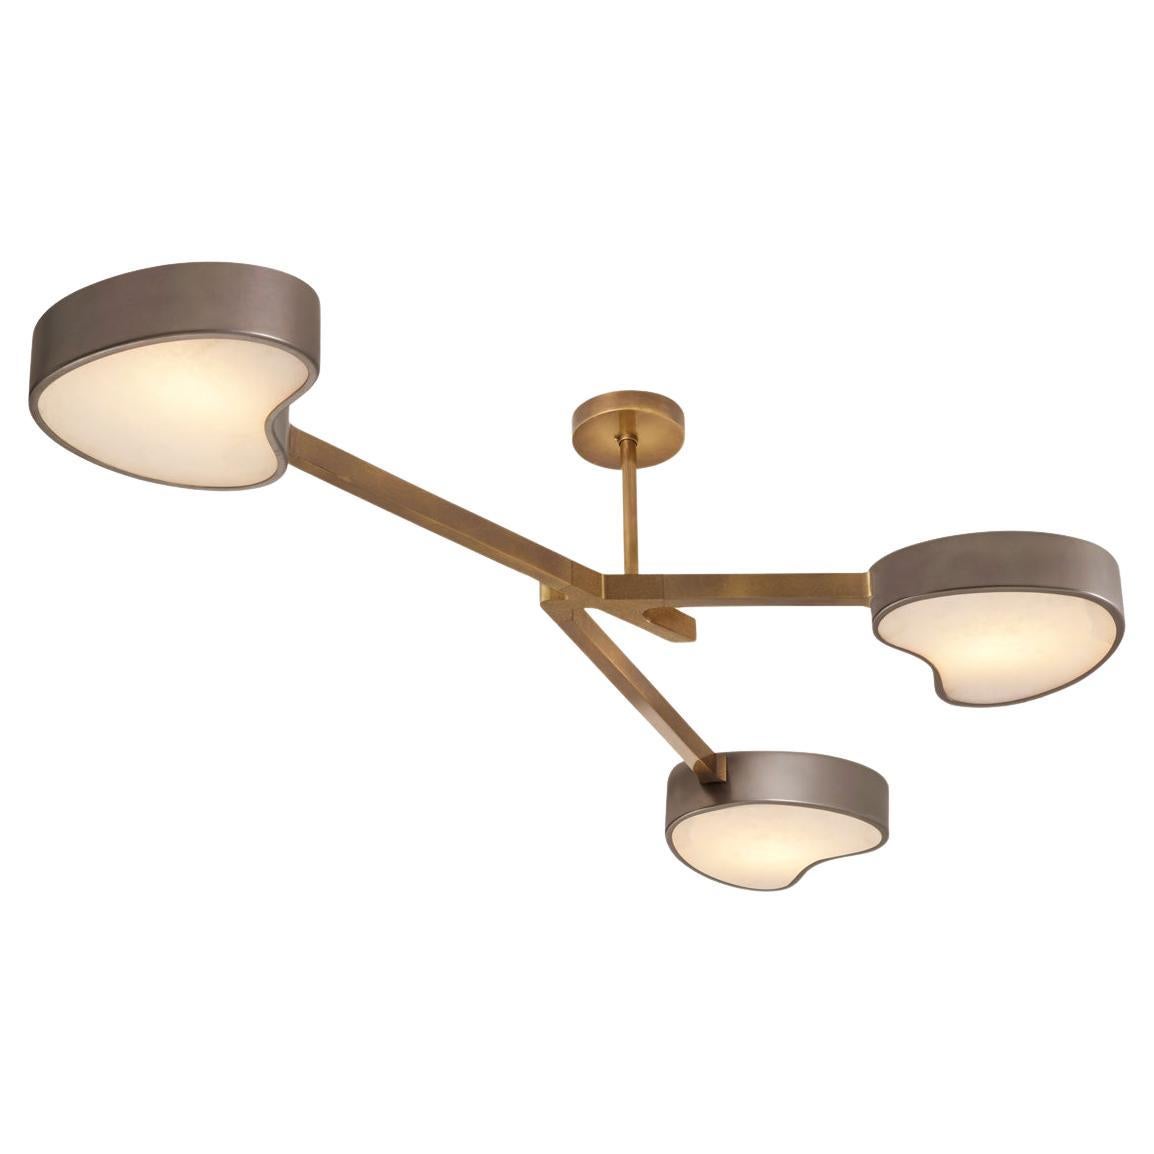 Cuore N.3 Ceiling Light by Gaspare Asaro. Peltro and Bronze Finish